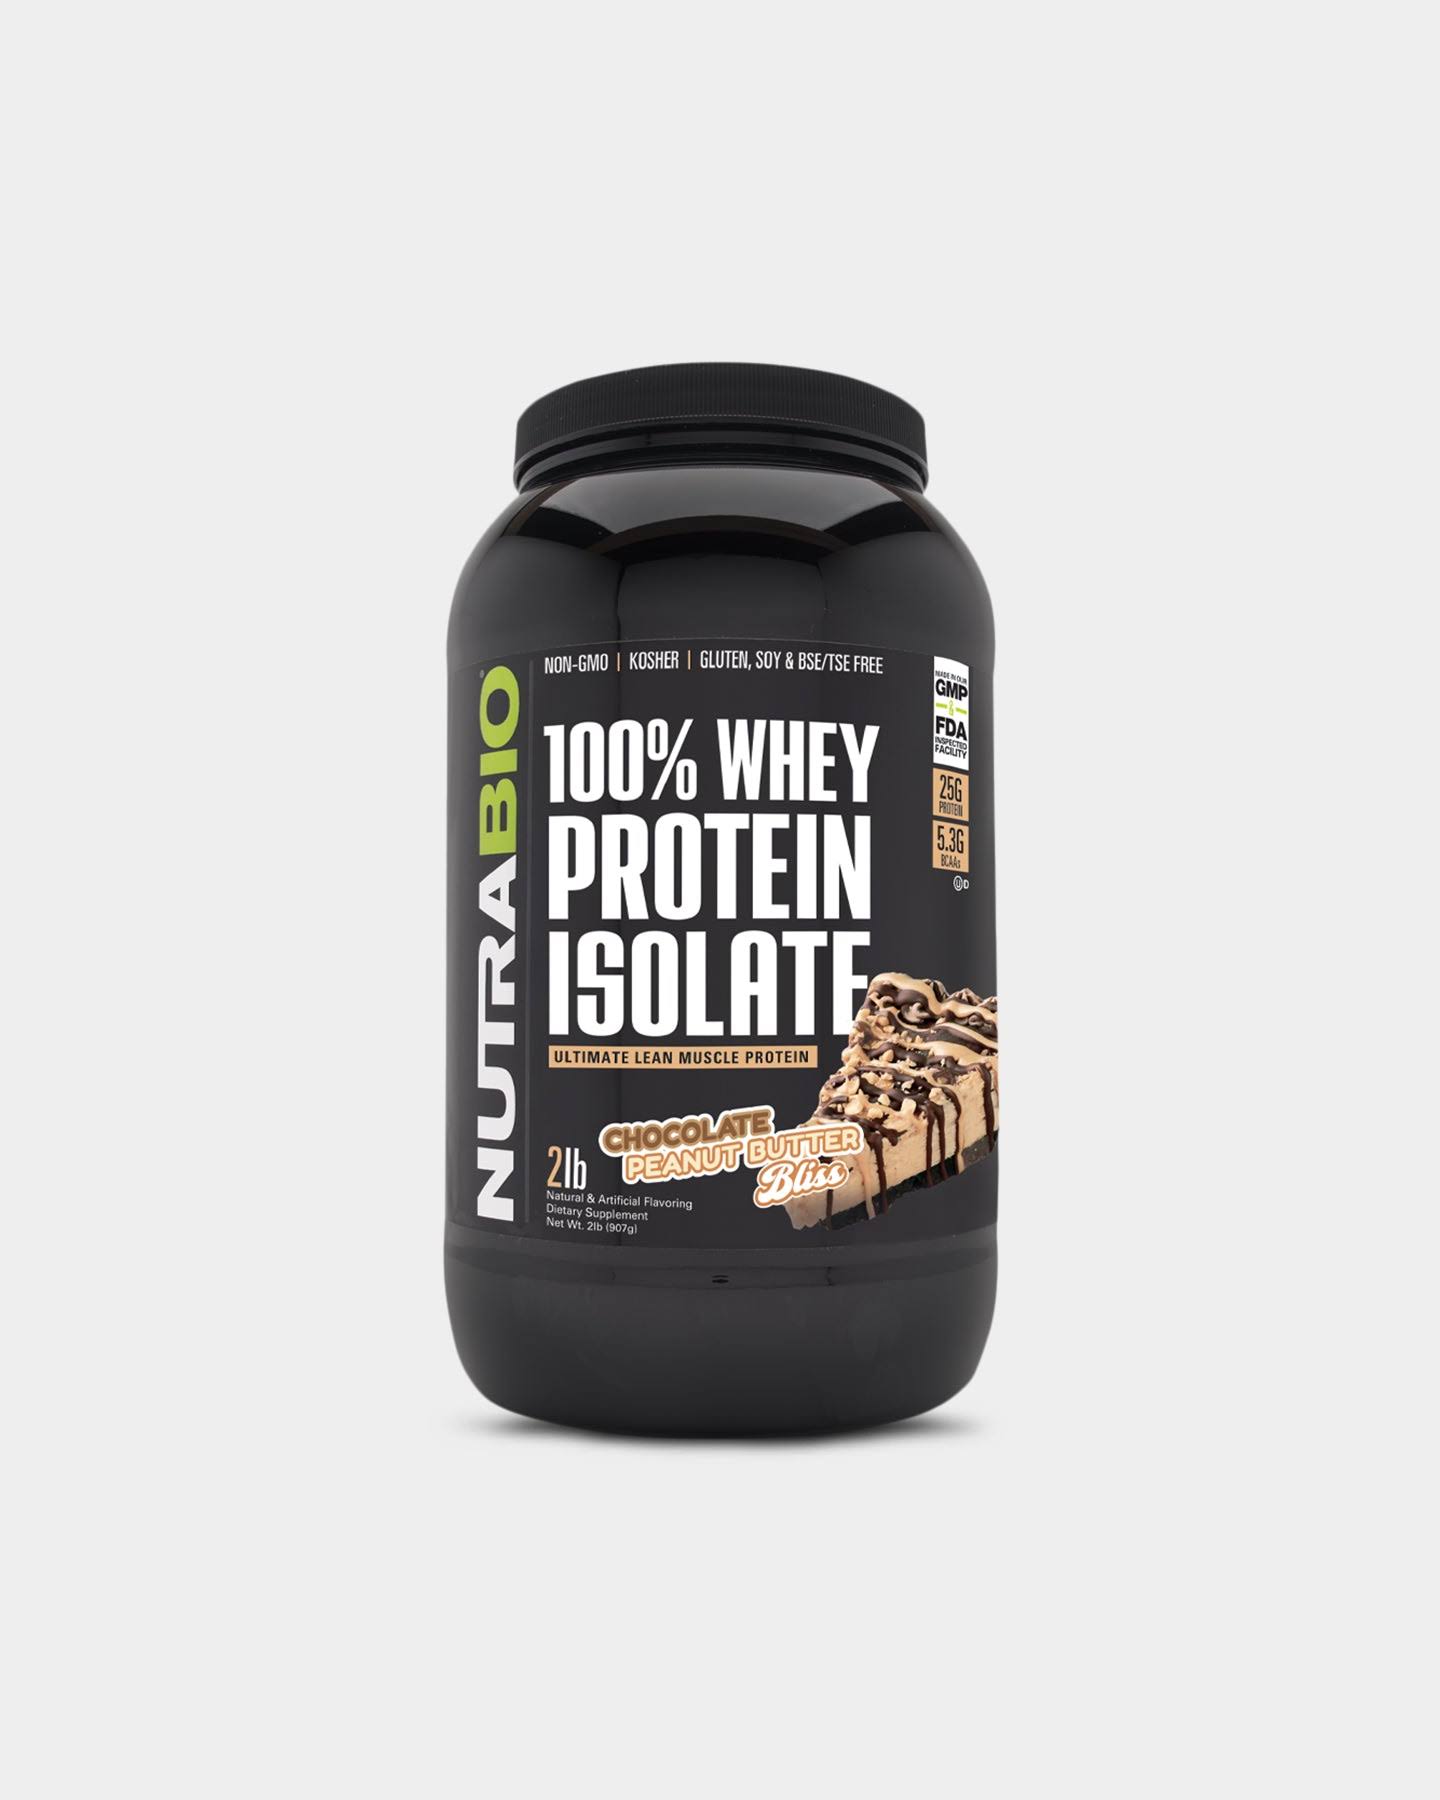 NutraBio Labs Whey Protein Isolate 907 gr Chocolate Peanut Butter